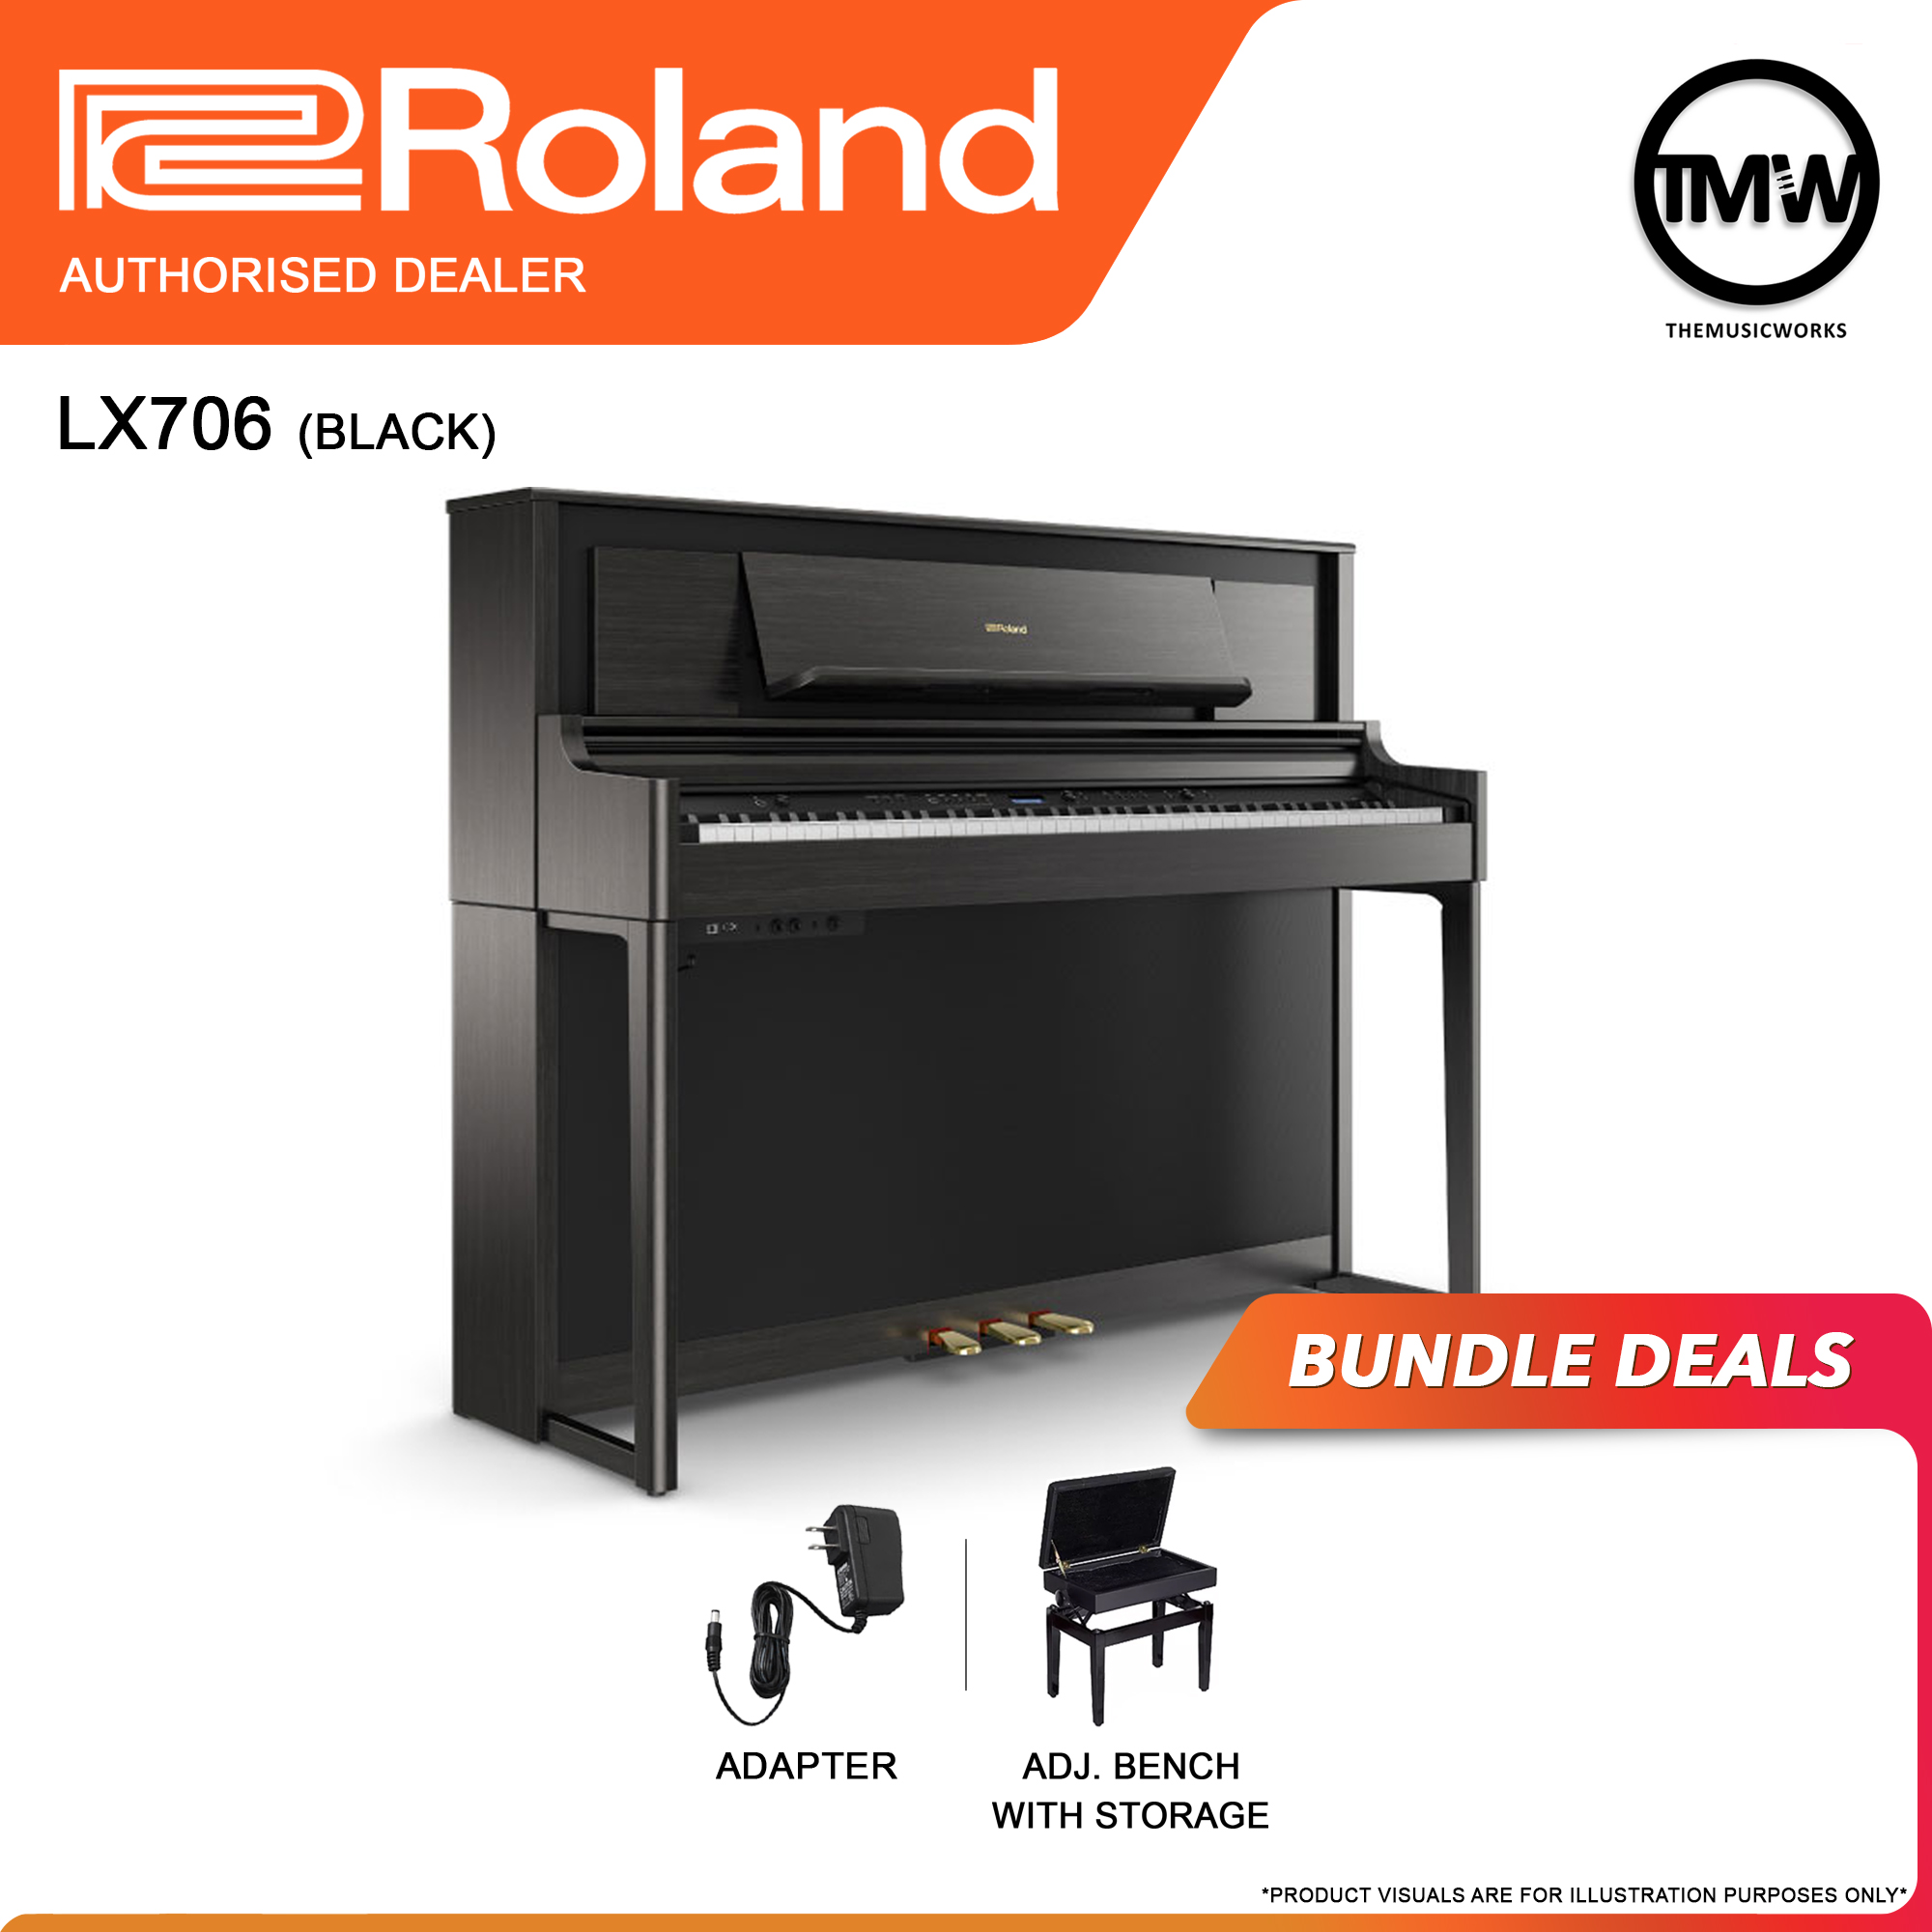 roland lx706 black with adapter, and adjustable bench with storage